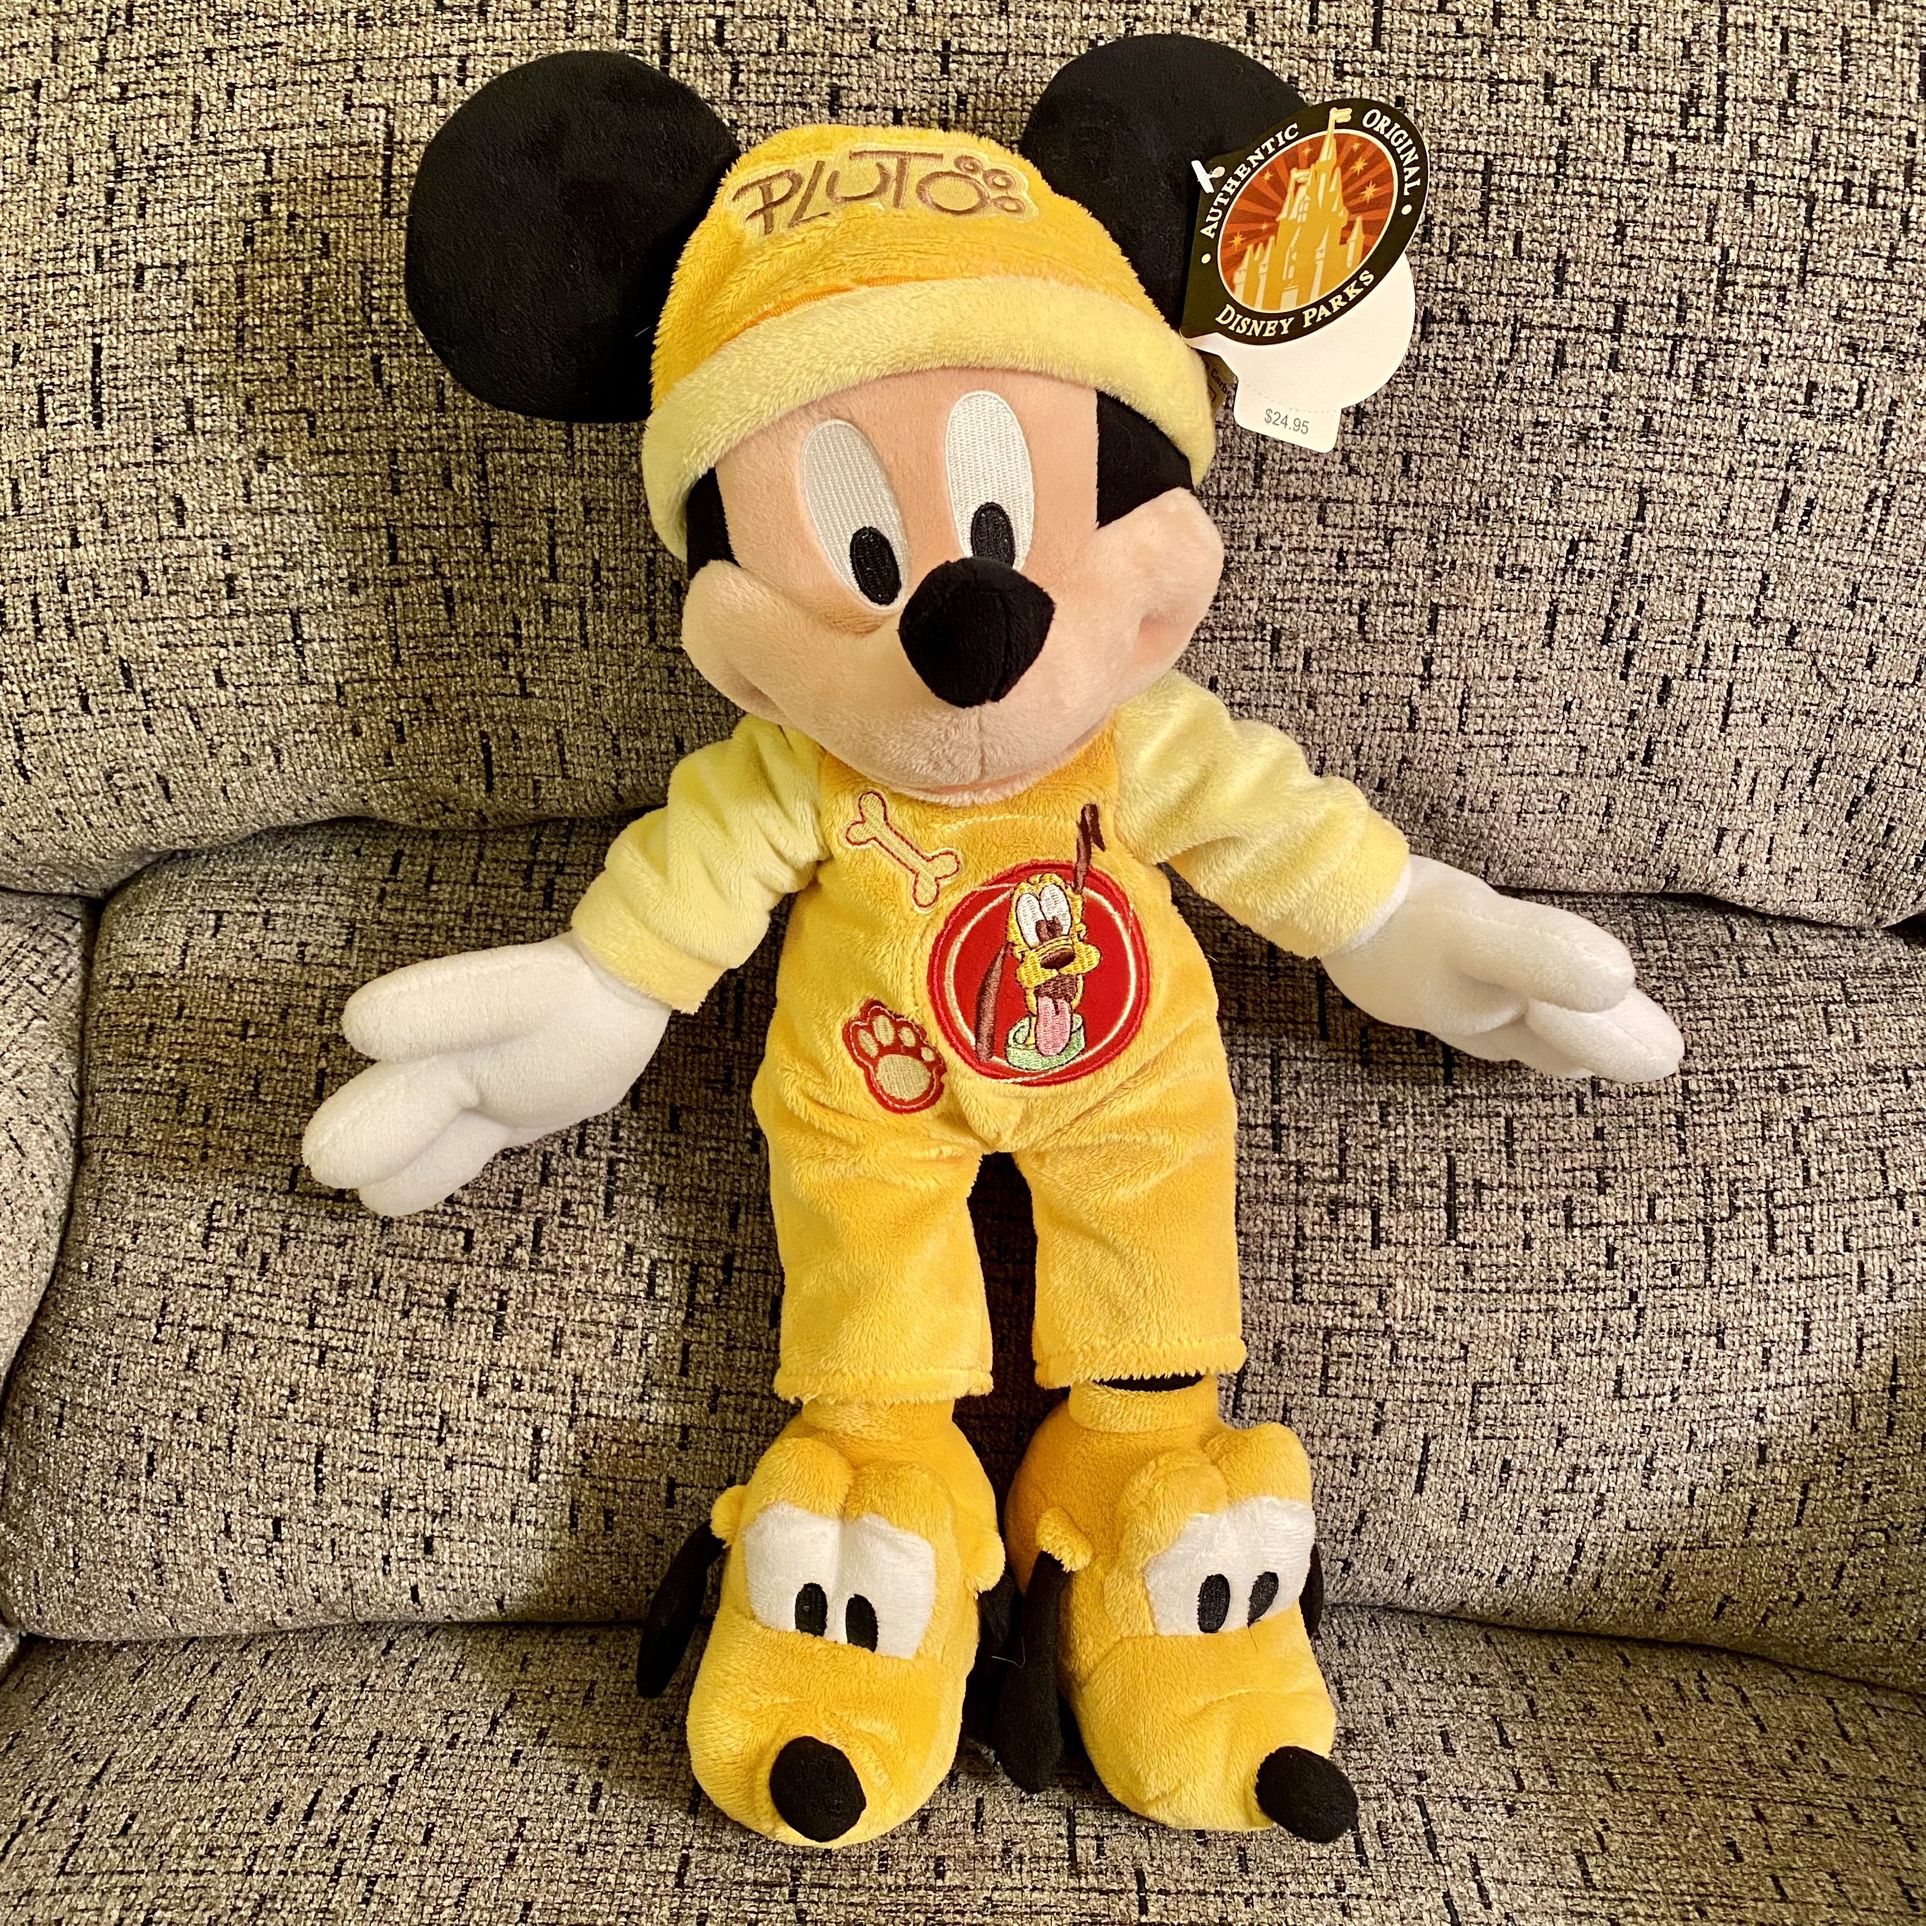 Goodnight Mickey Mouse Plush With Pluto Pajamas & Slippers  16"  Hard to Find